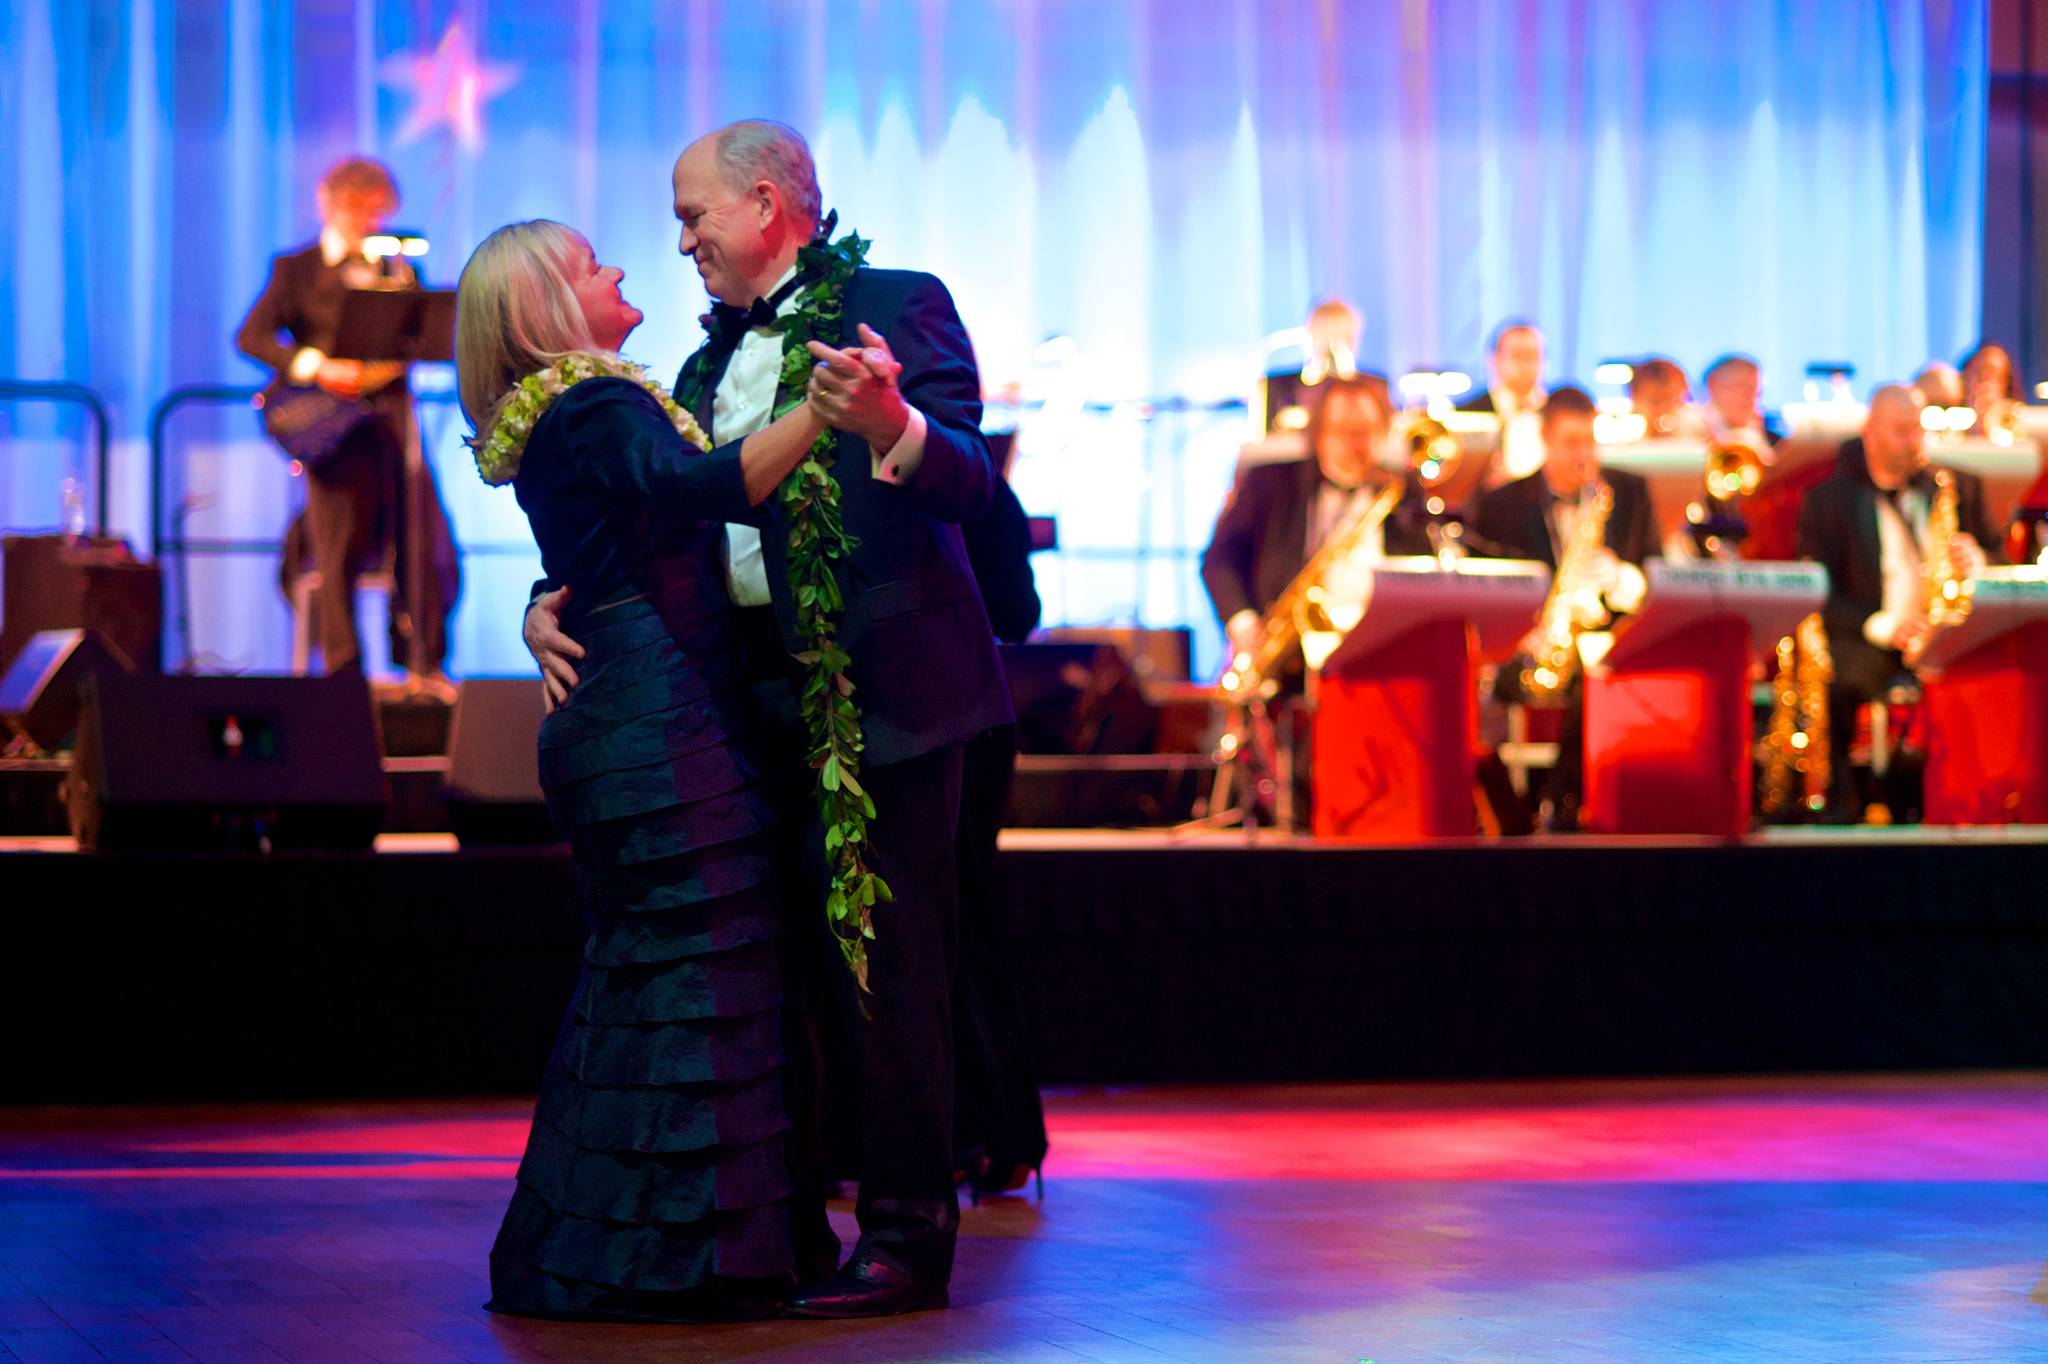 <span class="neFMT neFMT_PhotoCredit">File photo by Michael Penn/Juneau Empire</span>                                In this Jan. 10, 2015 photo, near midnight, Gov. Bill Walker dances the last song of the night by the Thunder Mountain Big Band with his wife, Donna, during the Inaugural Gala at Centennial Hall.